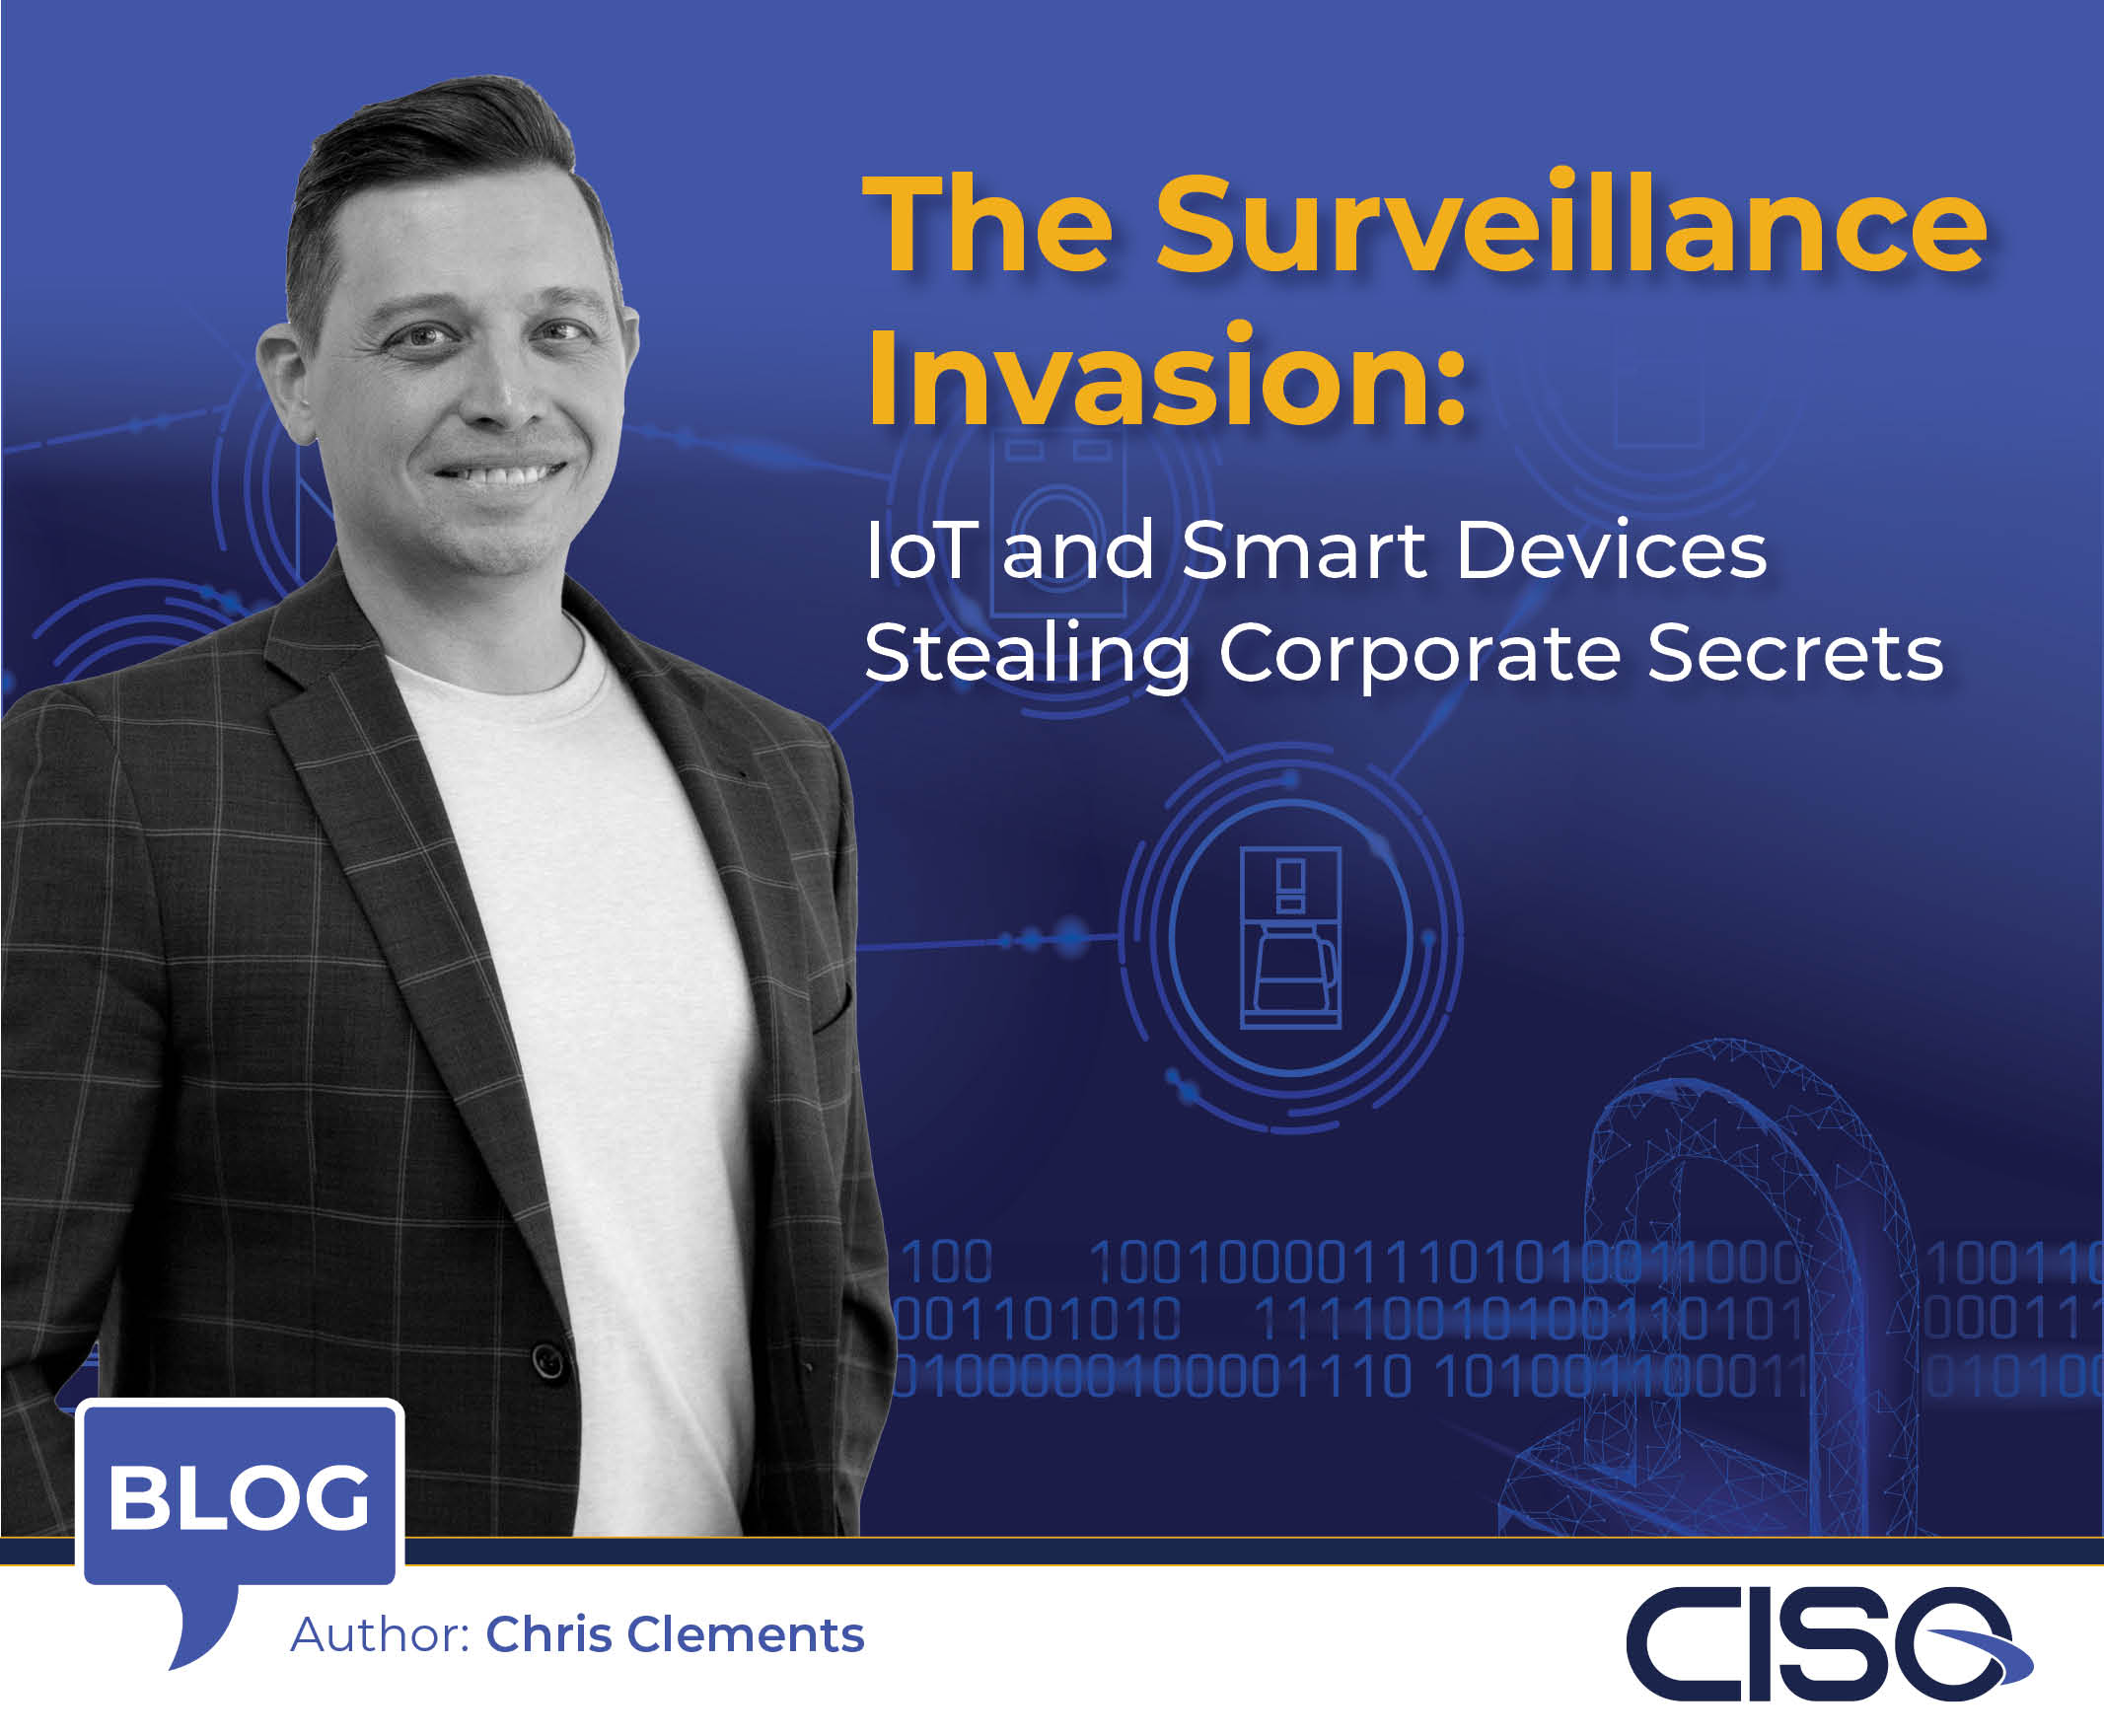 The Surveillance Invasion: IoT and Smart Devices Stealing Corporate Secrets